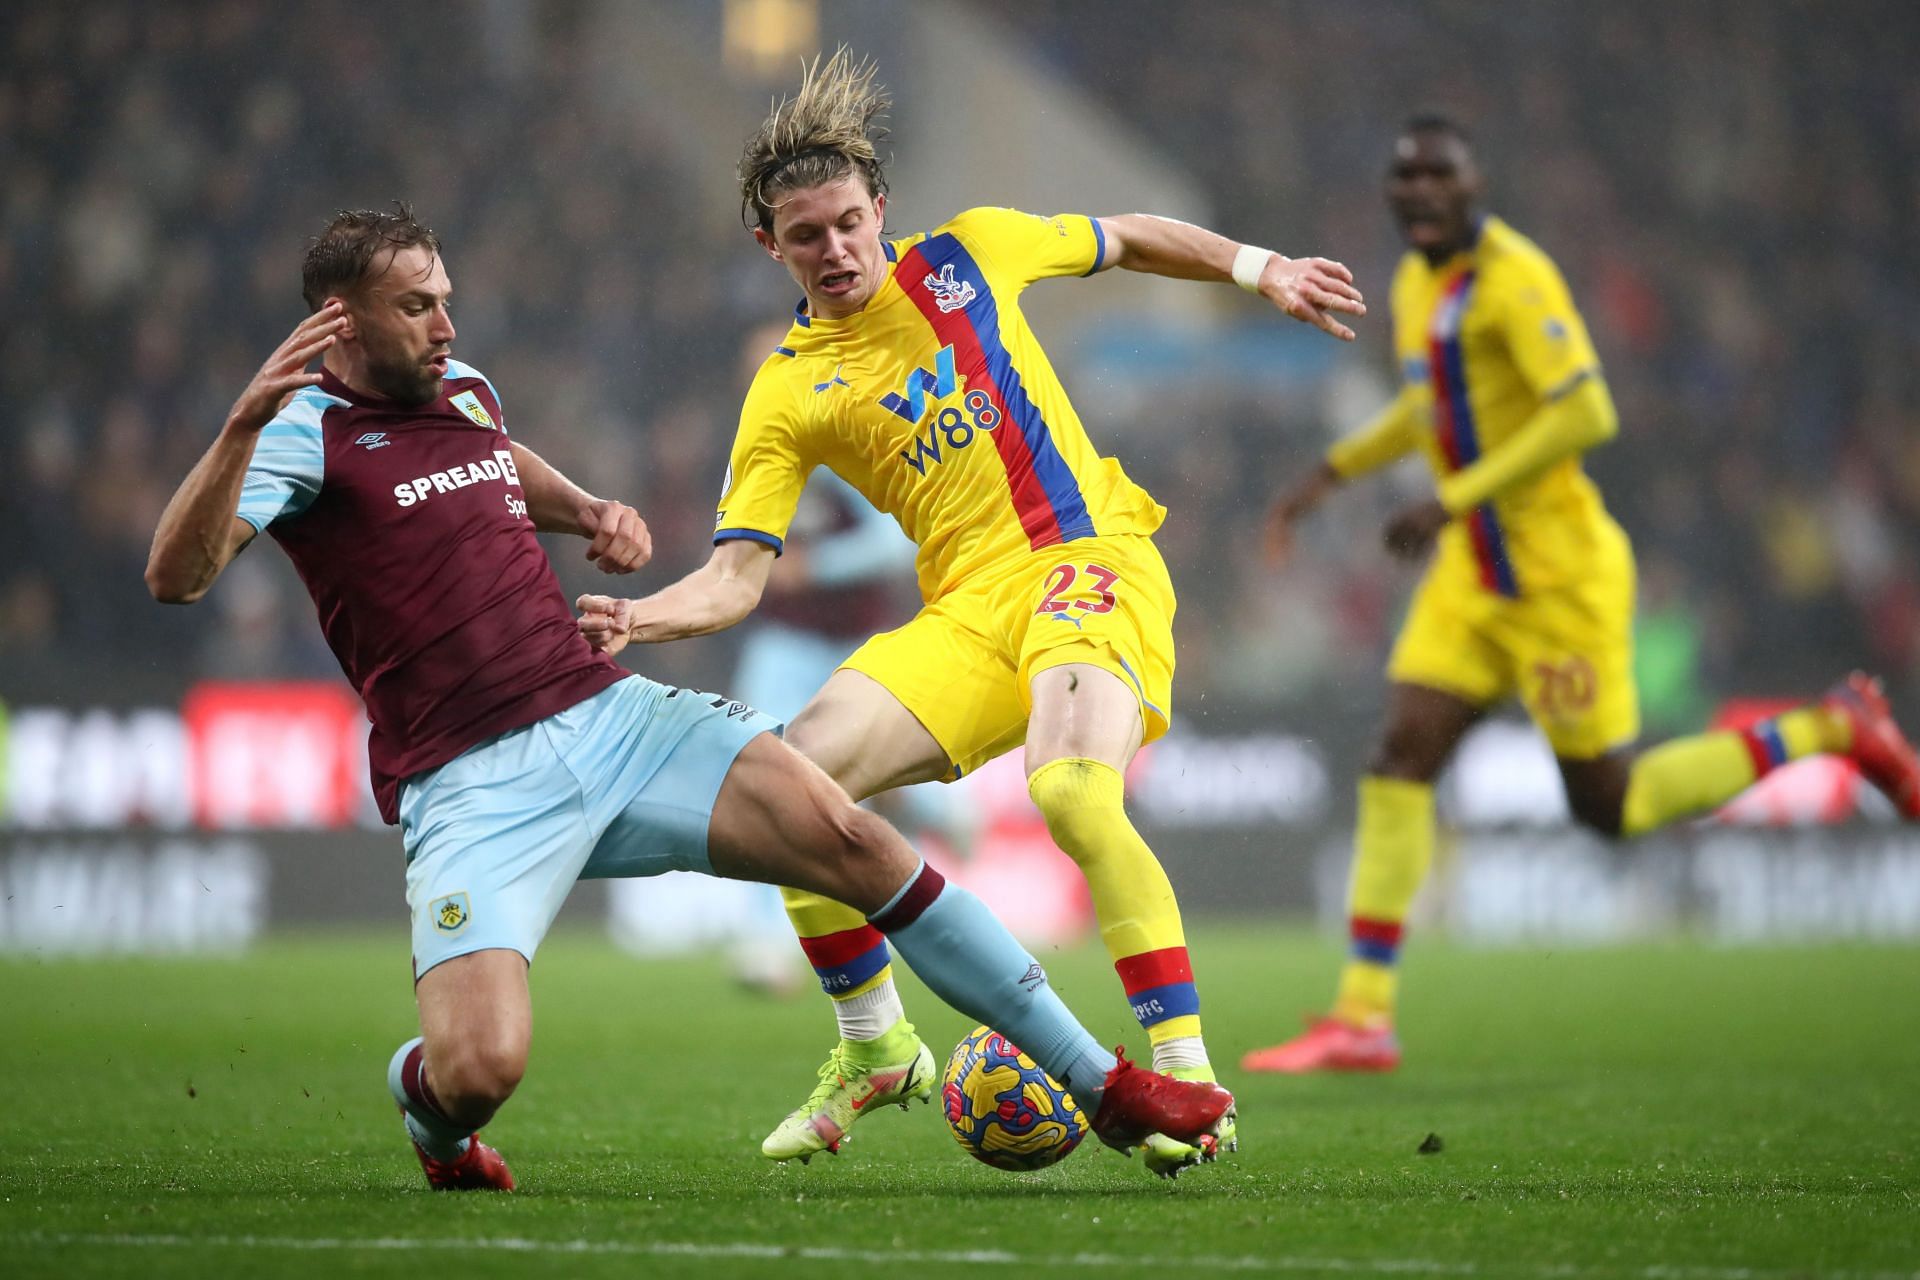 Crystal Palace play host to Burnley on Saturday